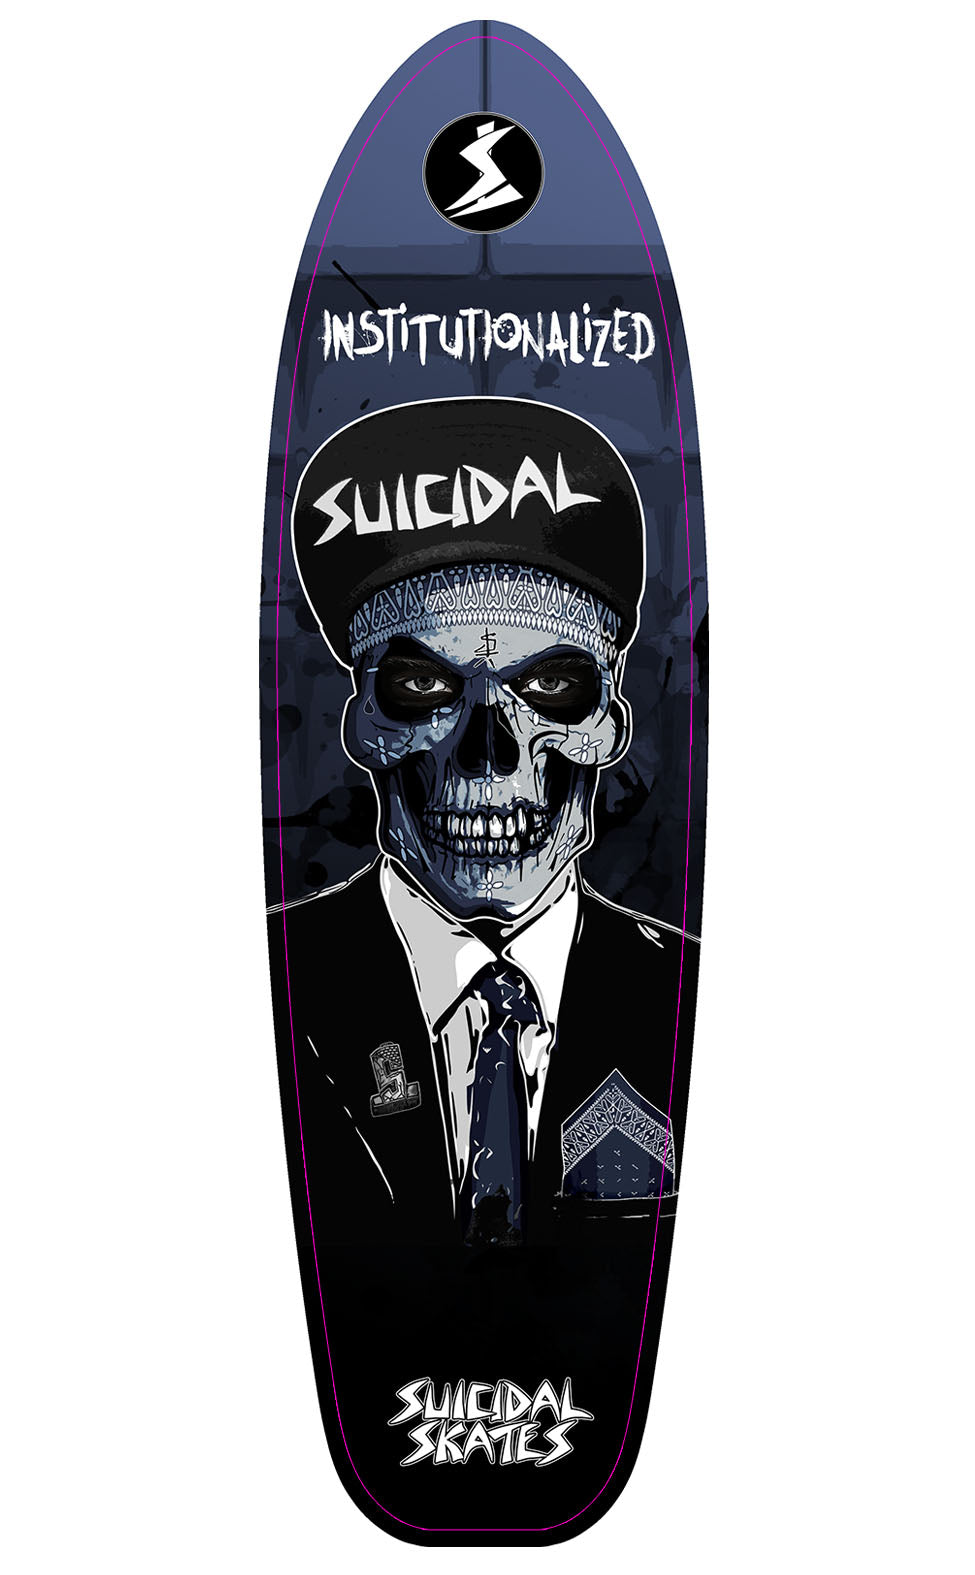 ST INSTITUTIONALIZED SUIT SURF N CRUISE DECK MAGNET